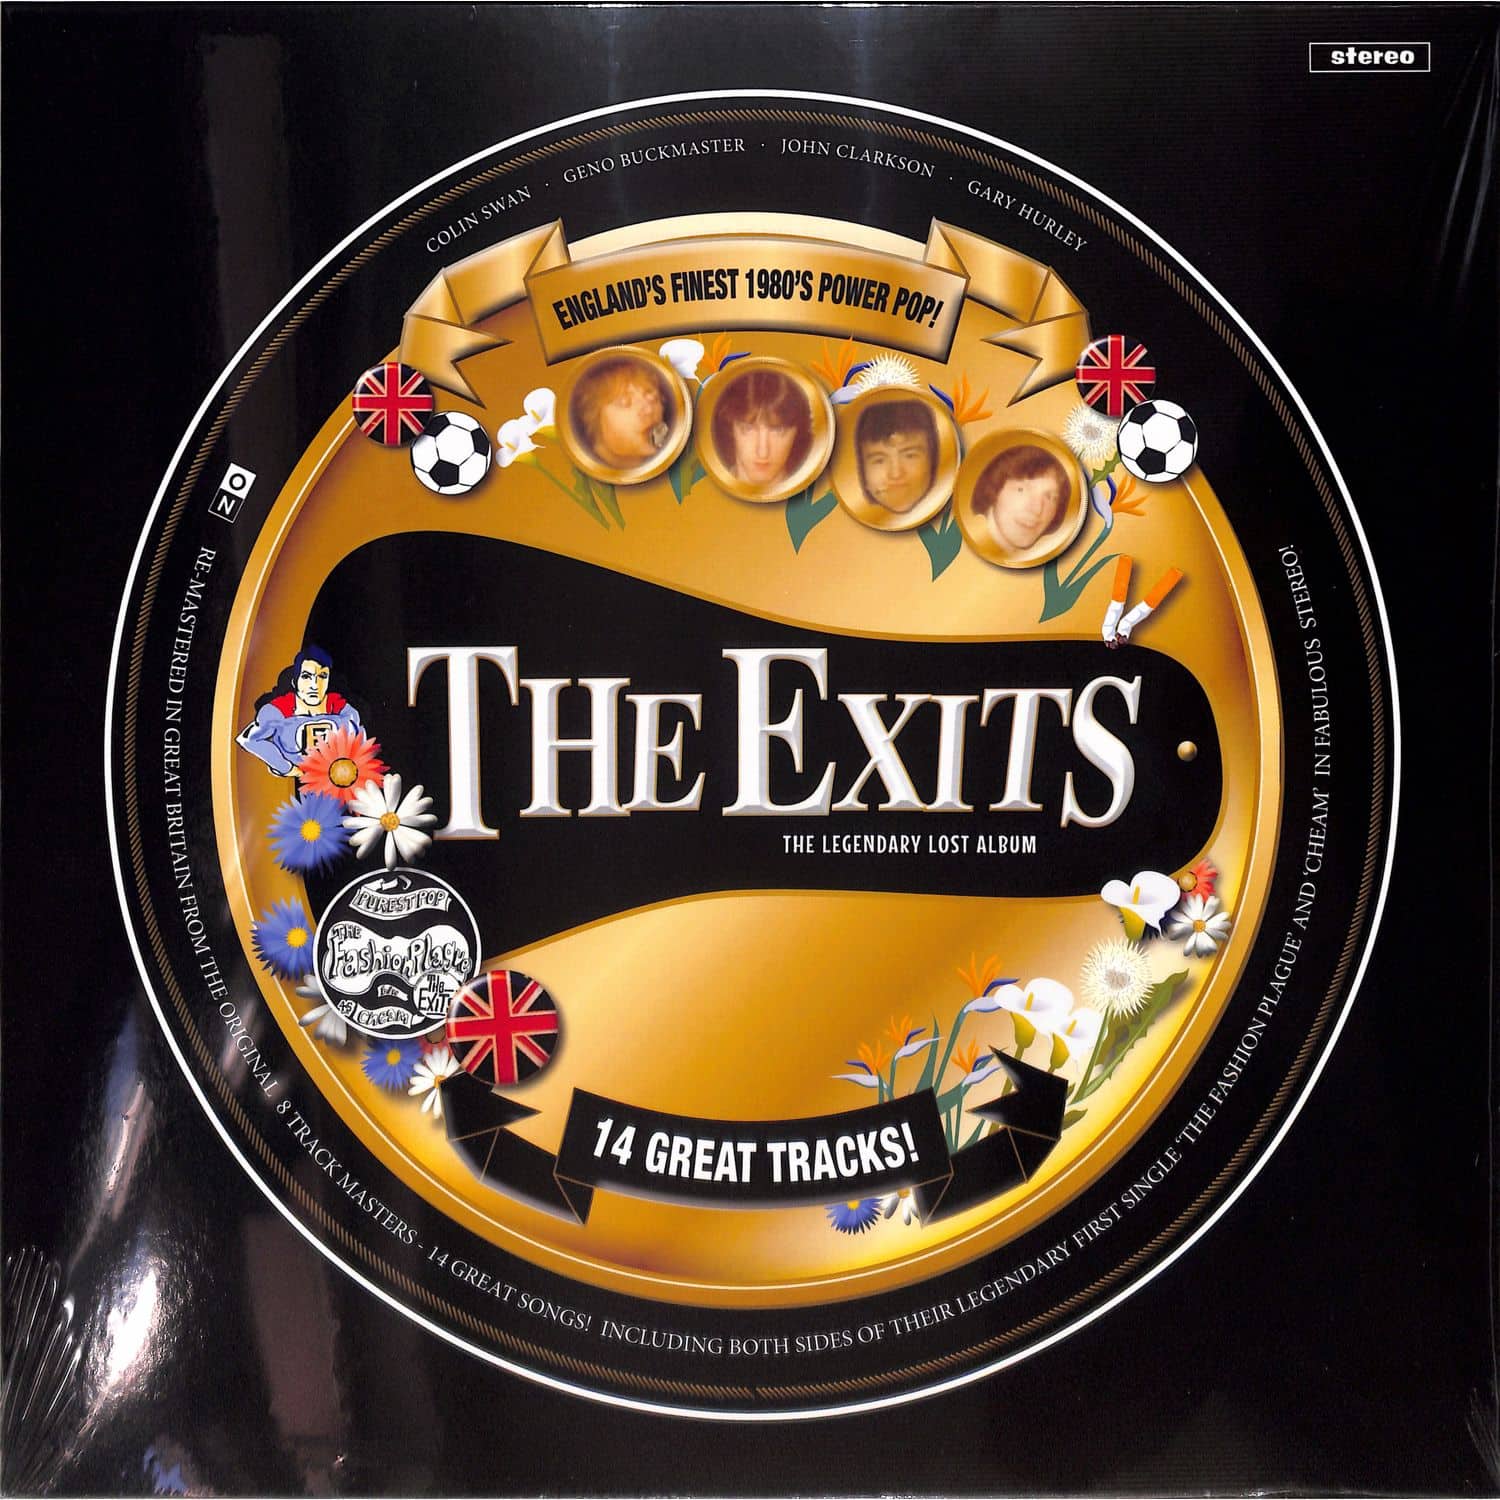 The Exits - THE LEGENDARY LOST ALBUM 